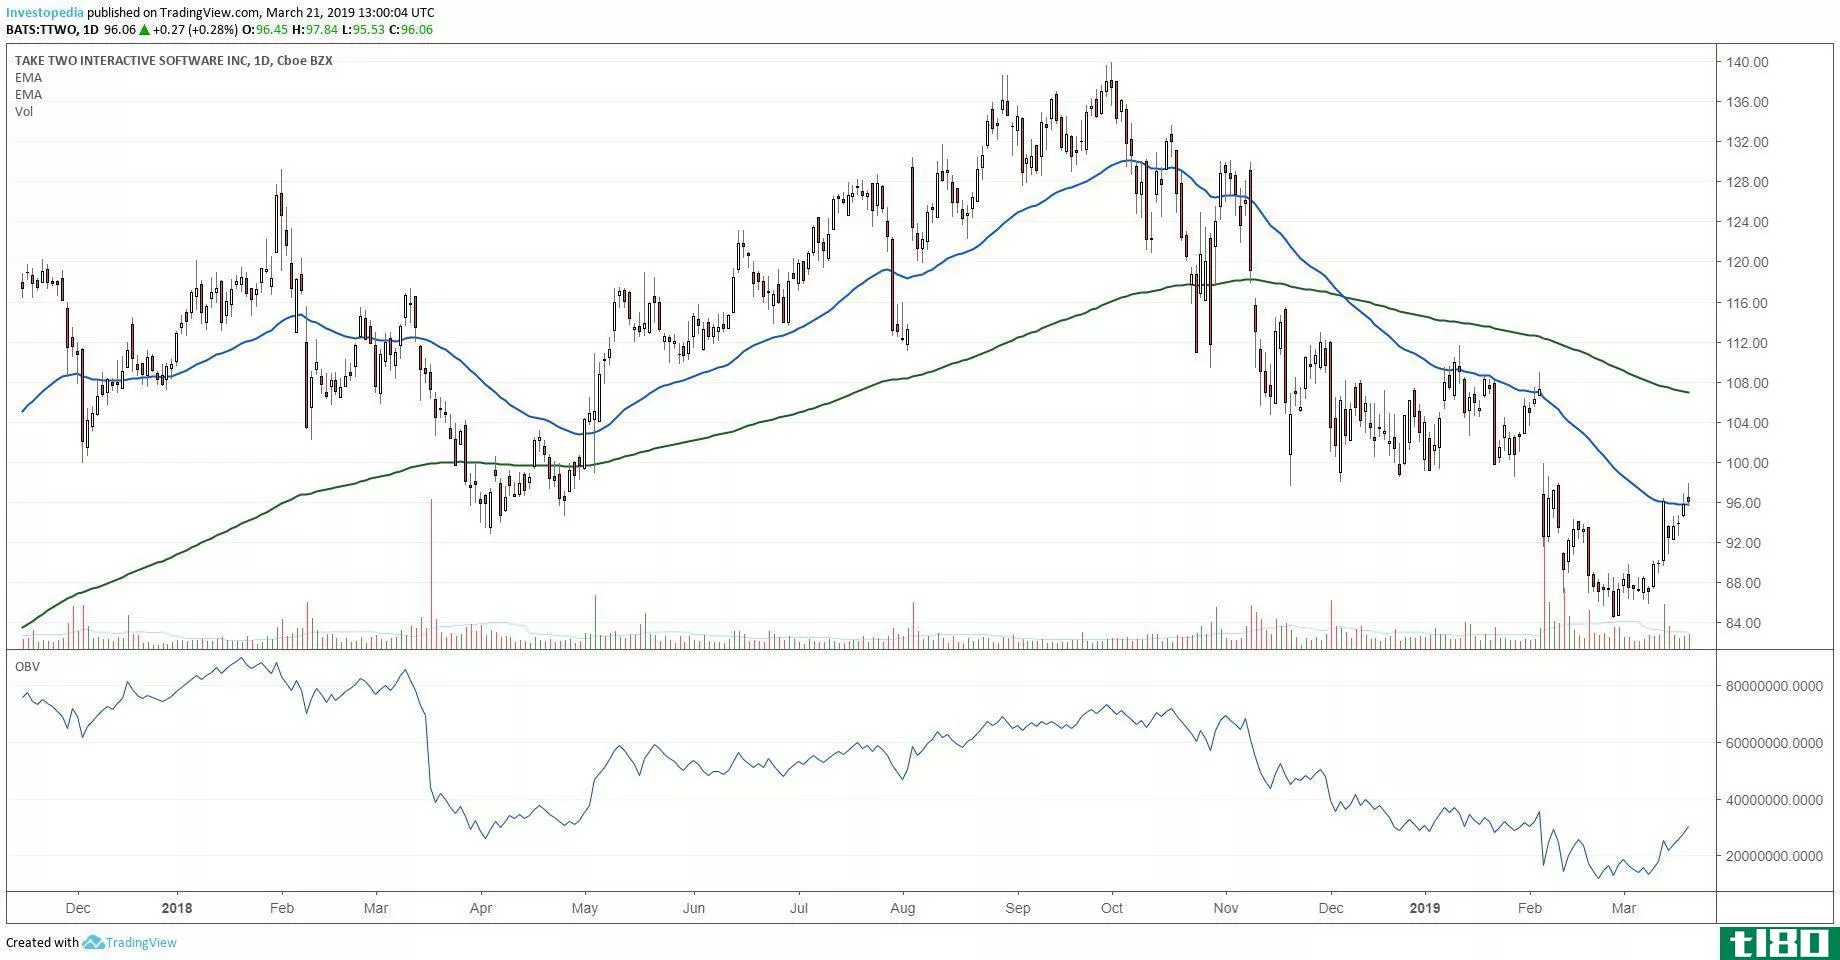 Technical chart showing the performance of Take-Two Interactive Software, Inc. (TTWO)